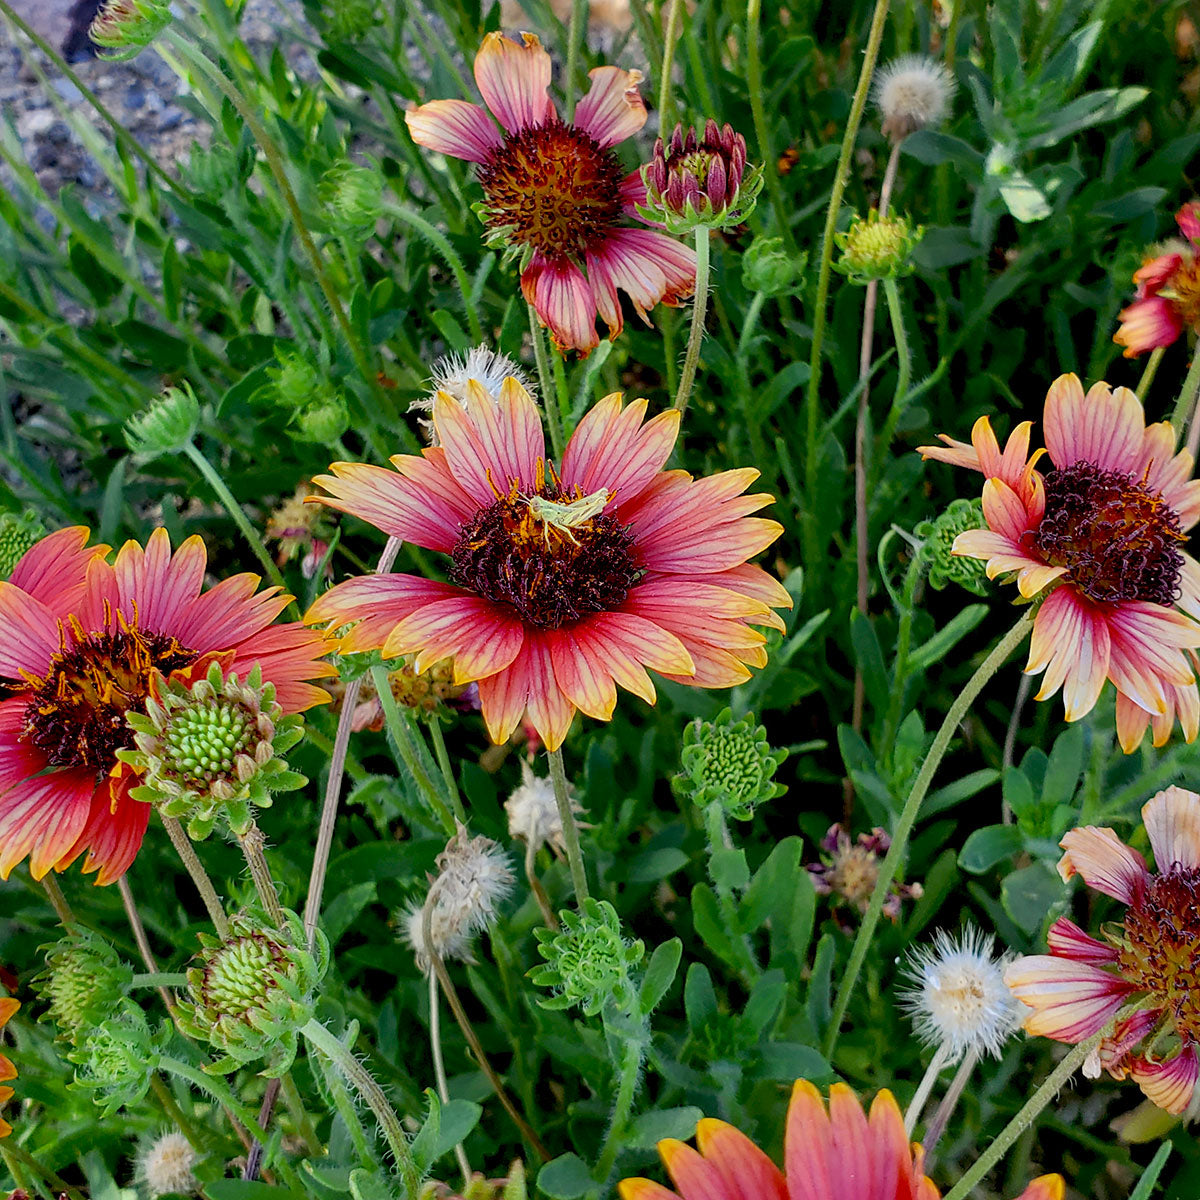 Firewheel has 2" diameter daisy-like flowers that are deep red with yellow tips. Blooms March through September. Plant in fall.  Attracts numerous bees and butterflies.  Native to Arizona, New Mexico and California.